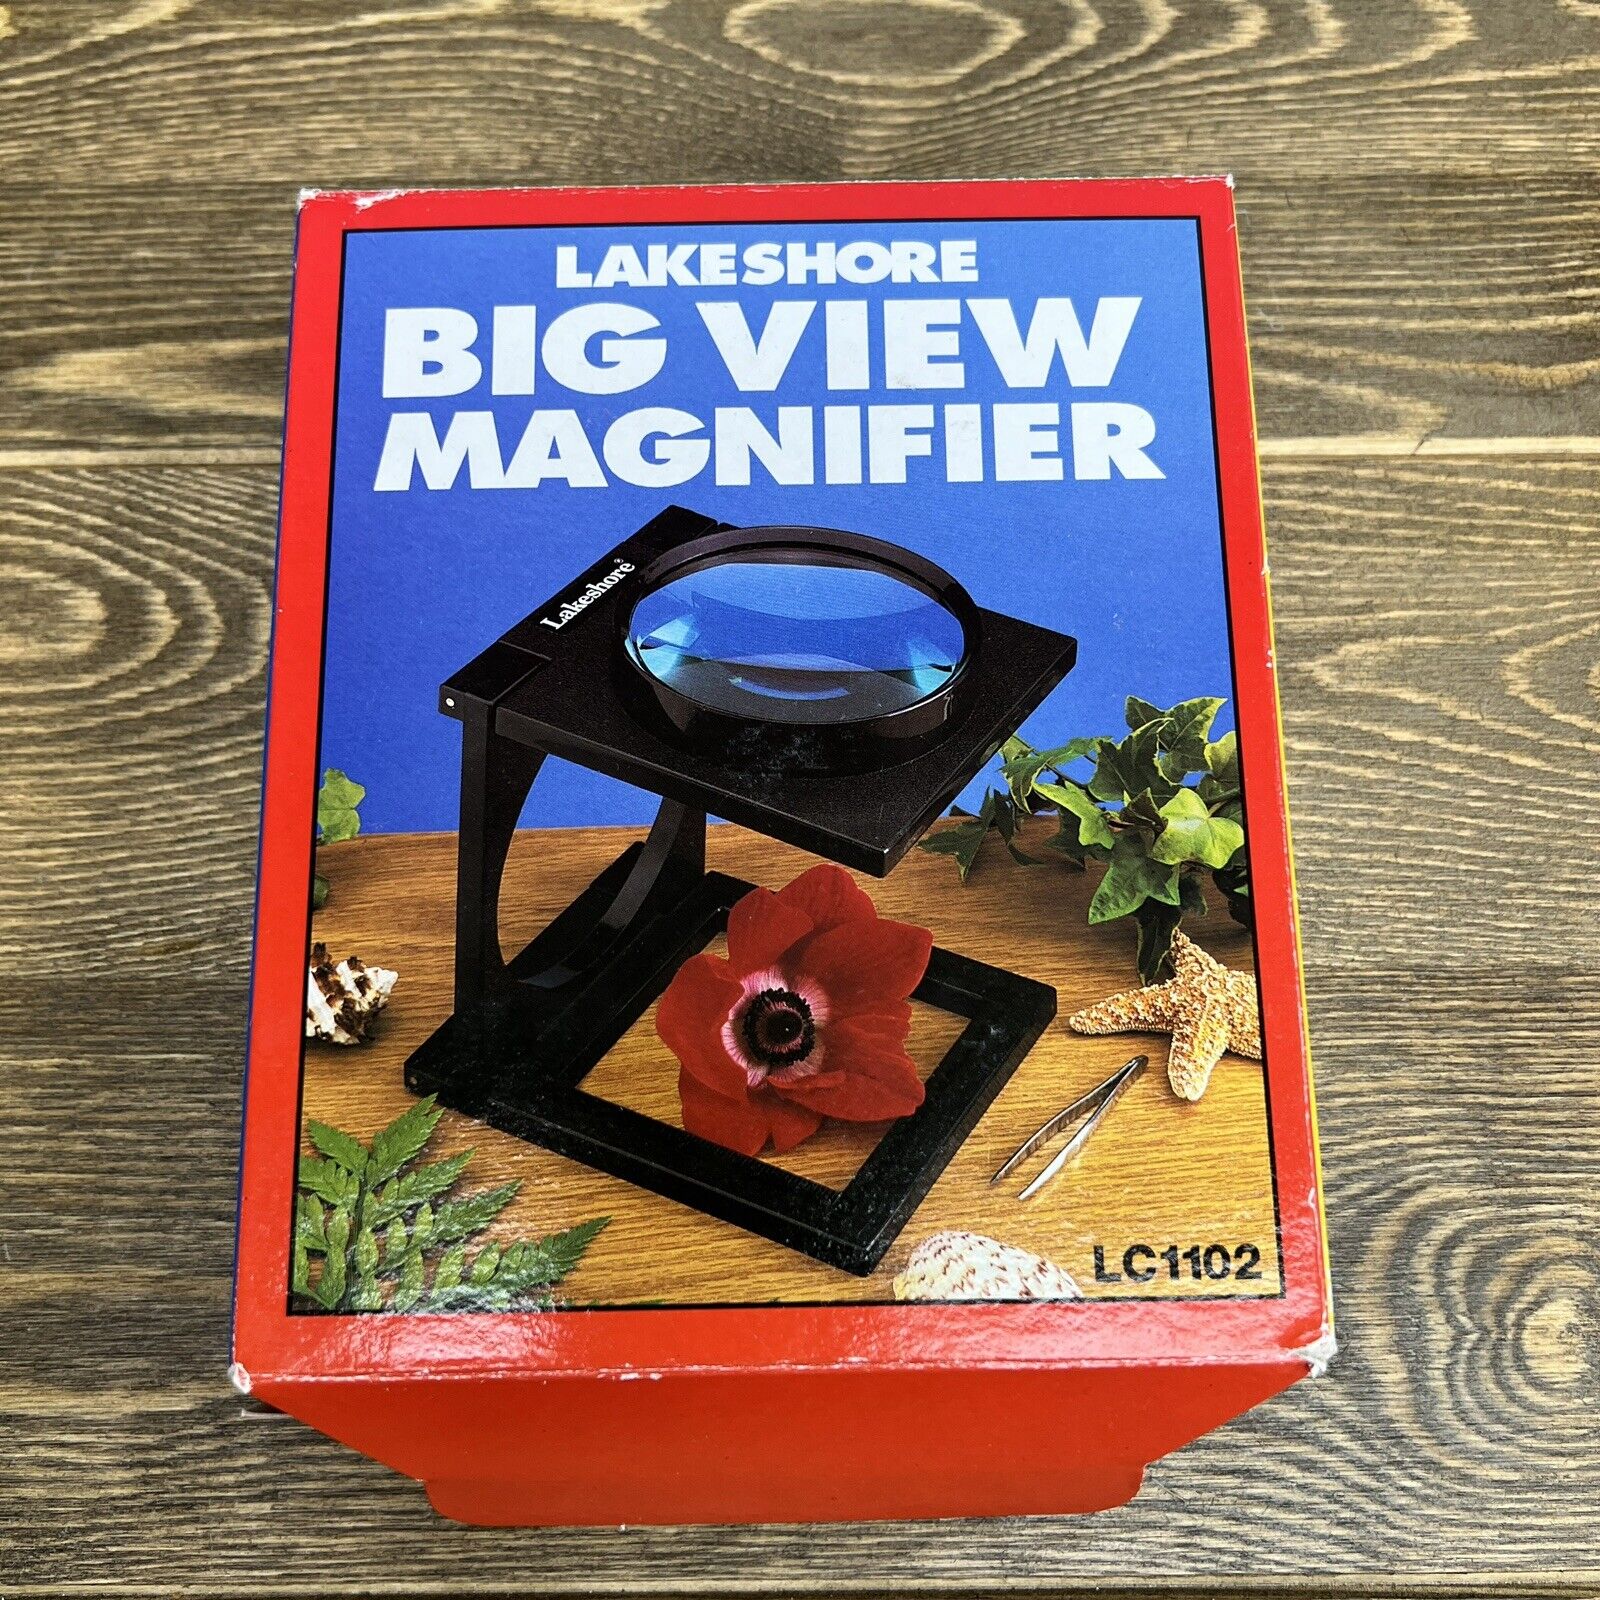 Big View Magnifier Magnifying Glass Lakeshore LC1102